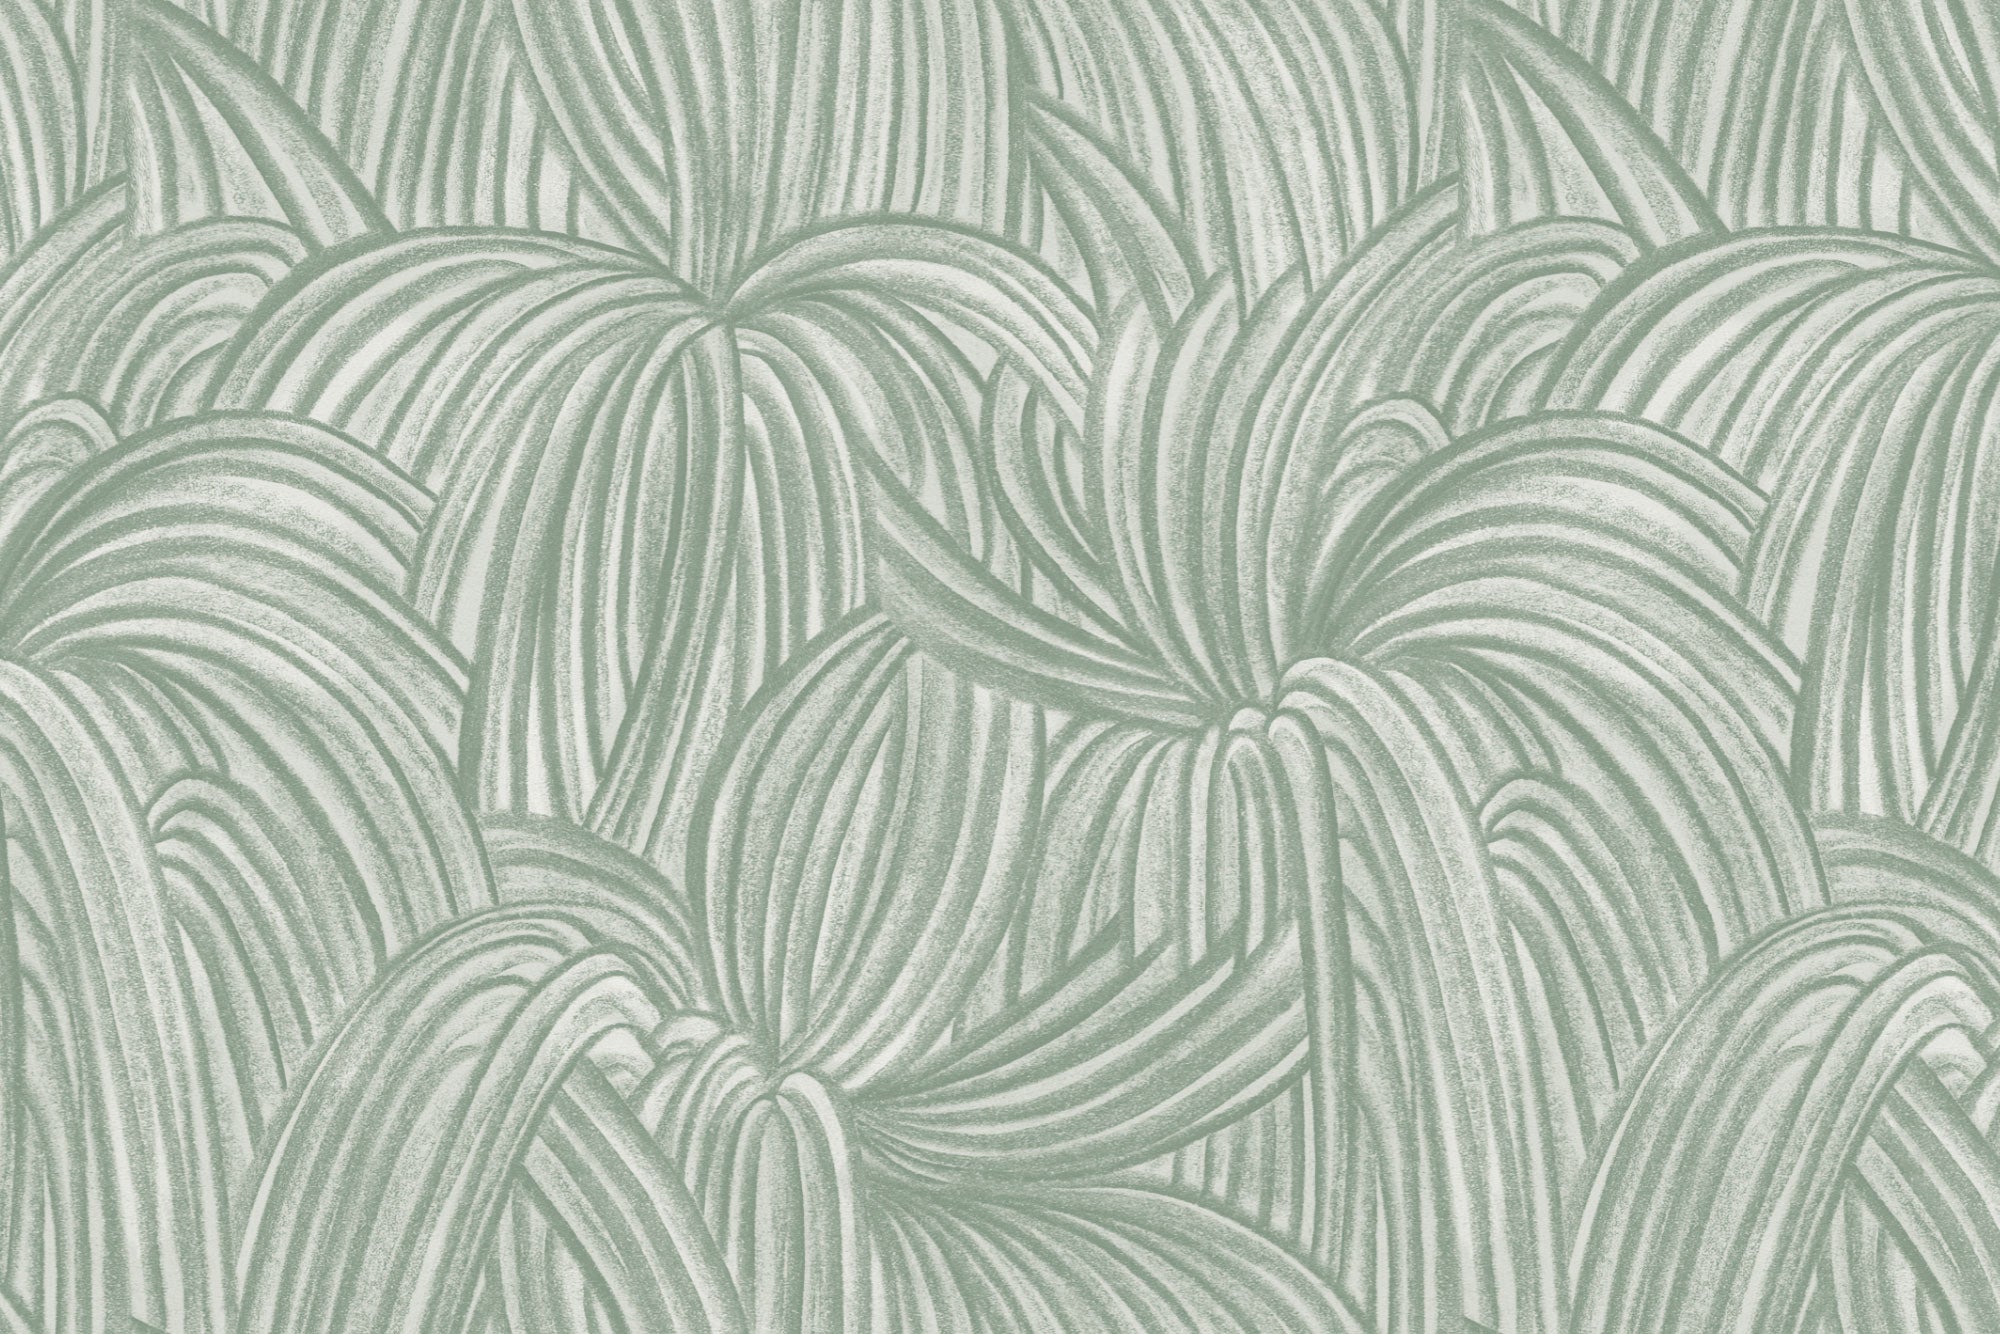 Detail of wallpaper in a textural painted print in sage on a cream field.